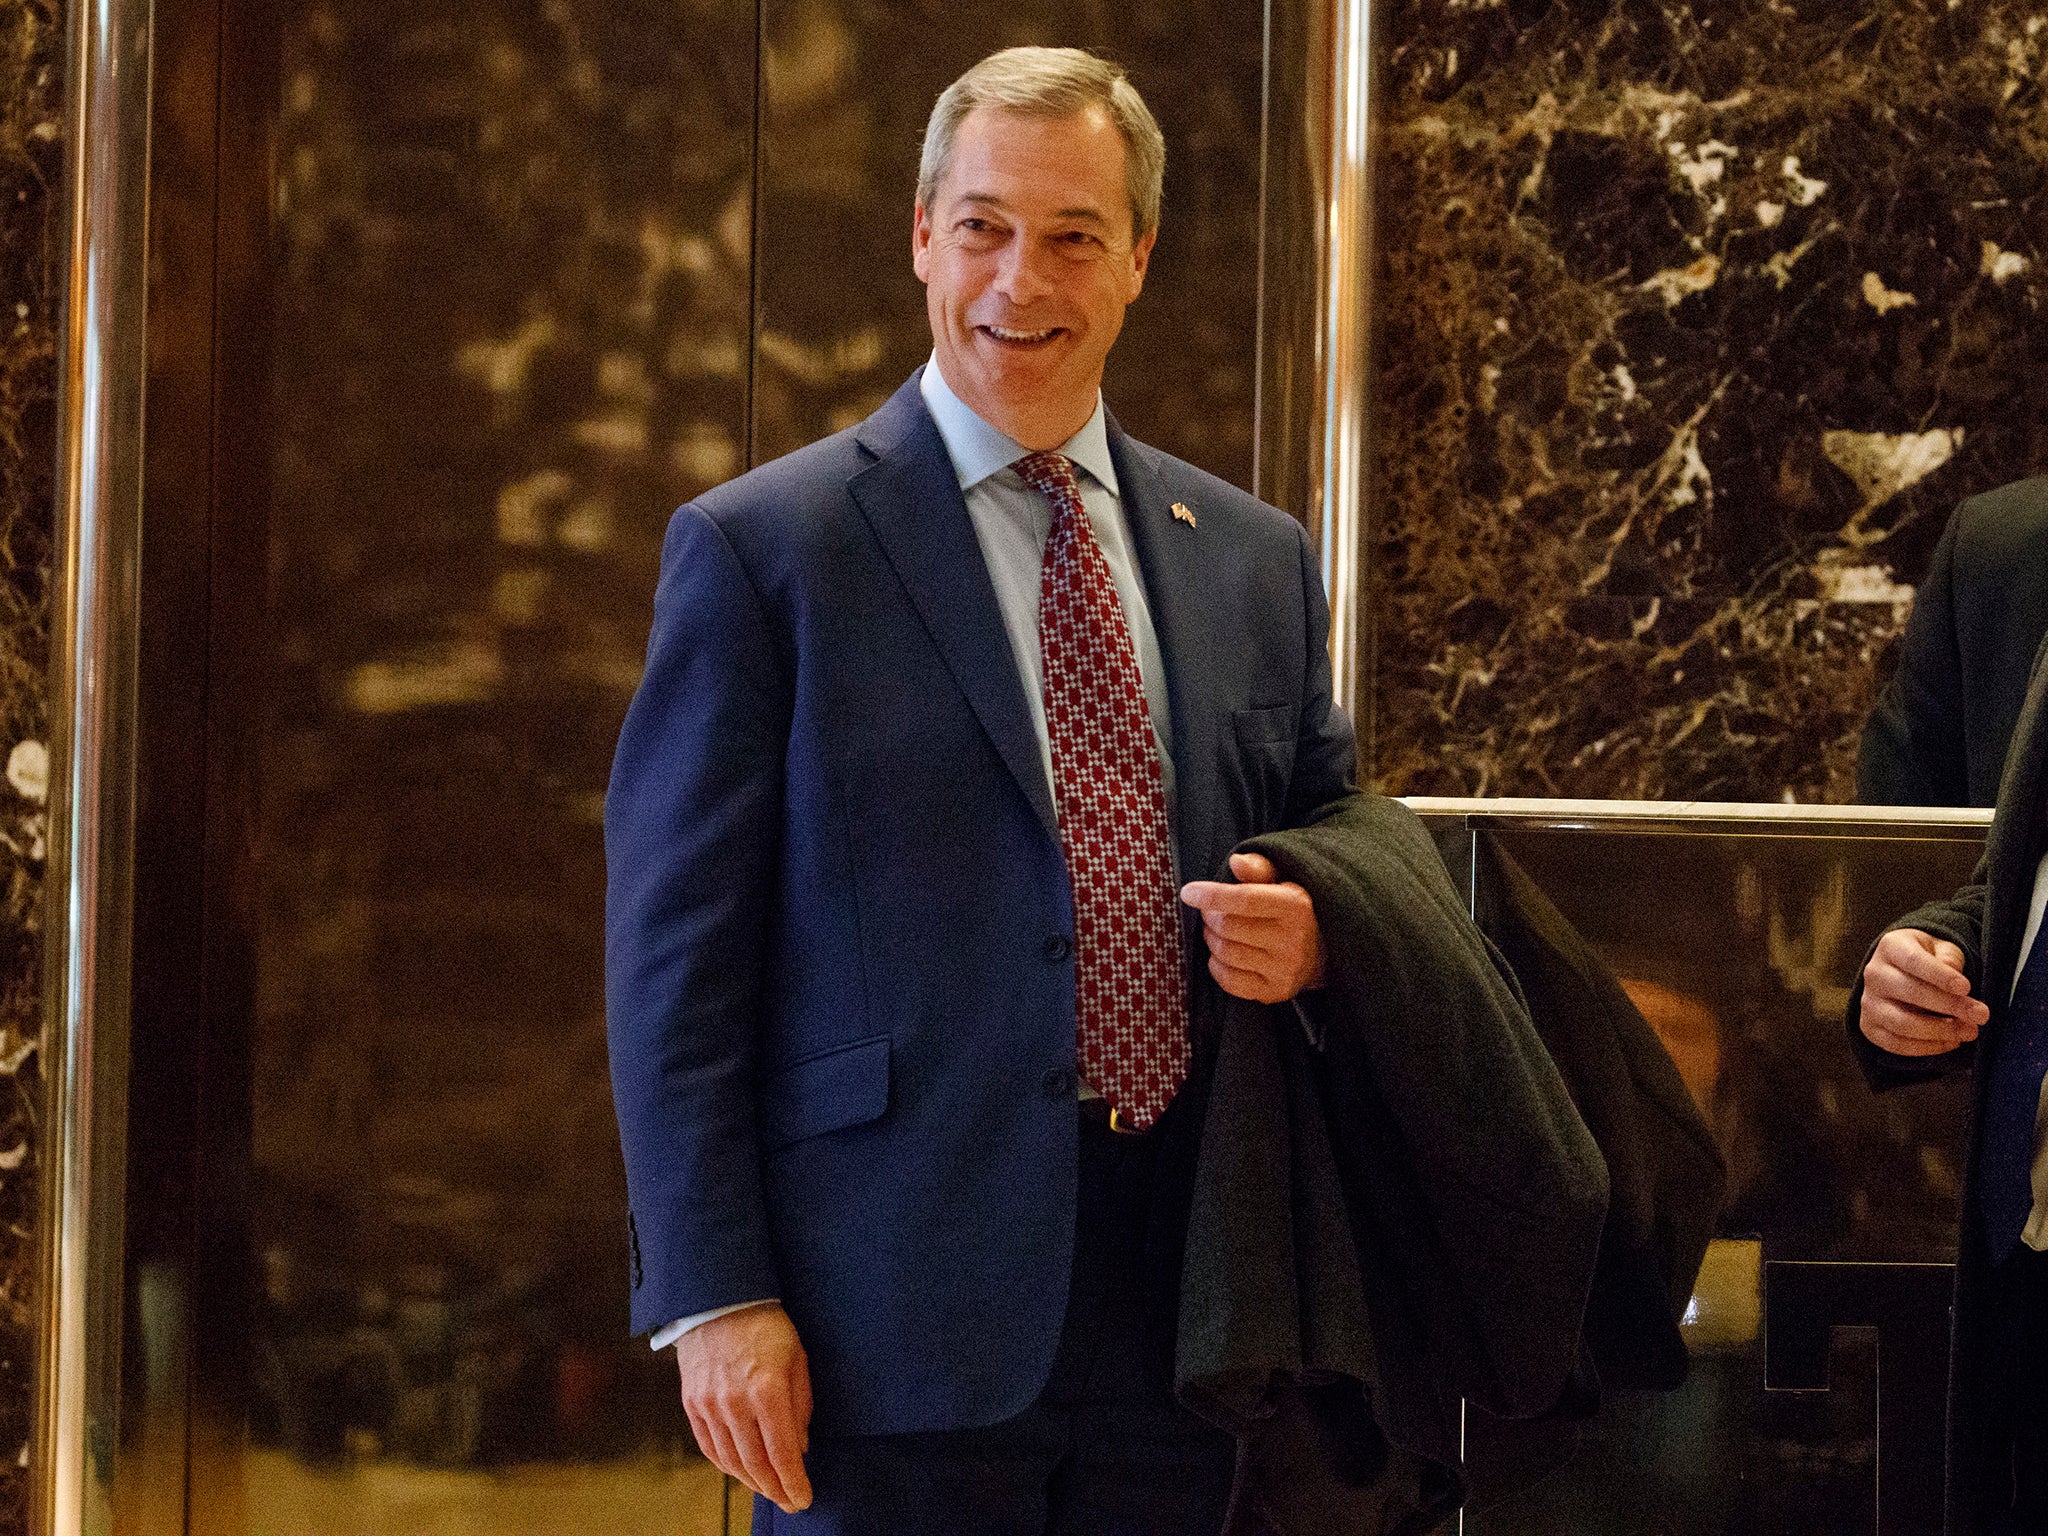 Whether you agree or disagree with his views, the Ukip leader is a politician of stature who submitted himself to the democratic system, and by force of persuasion prevailed